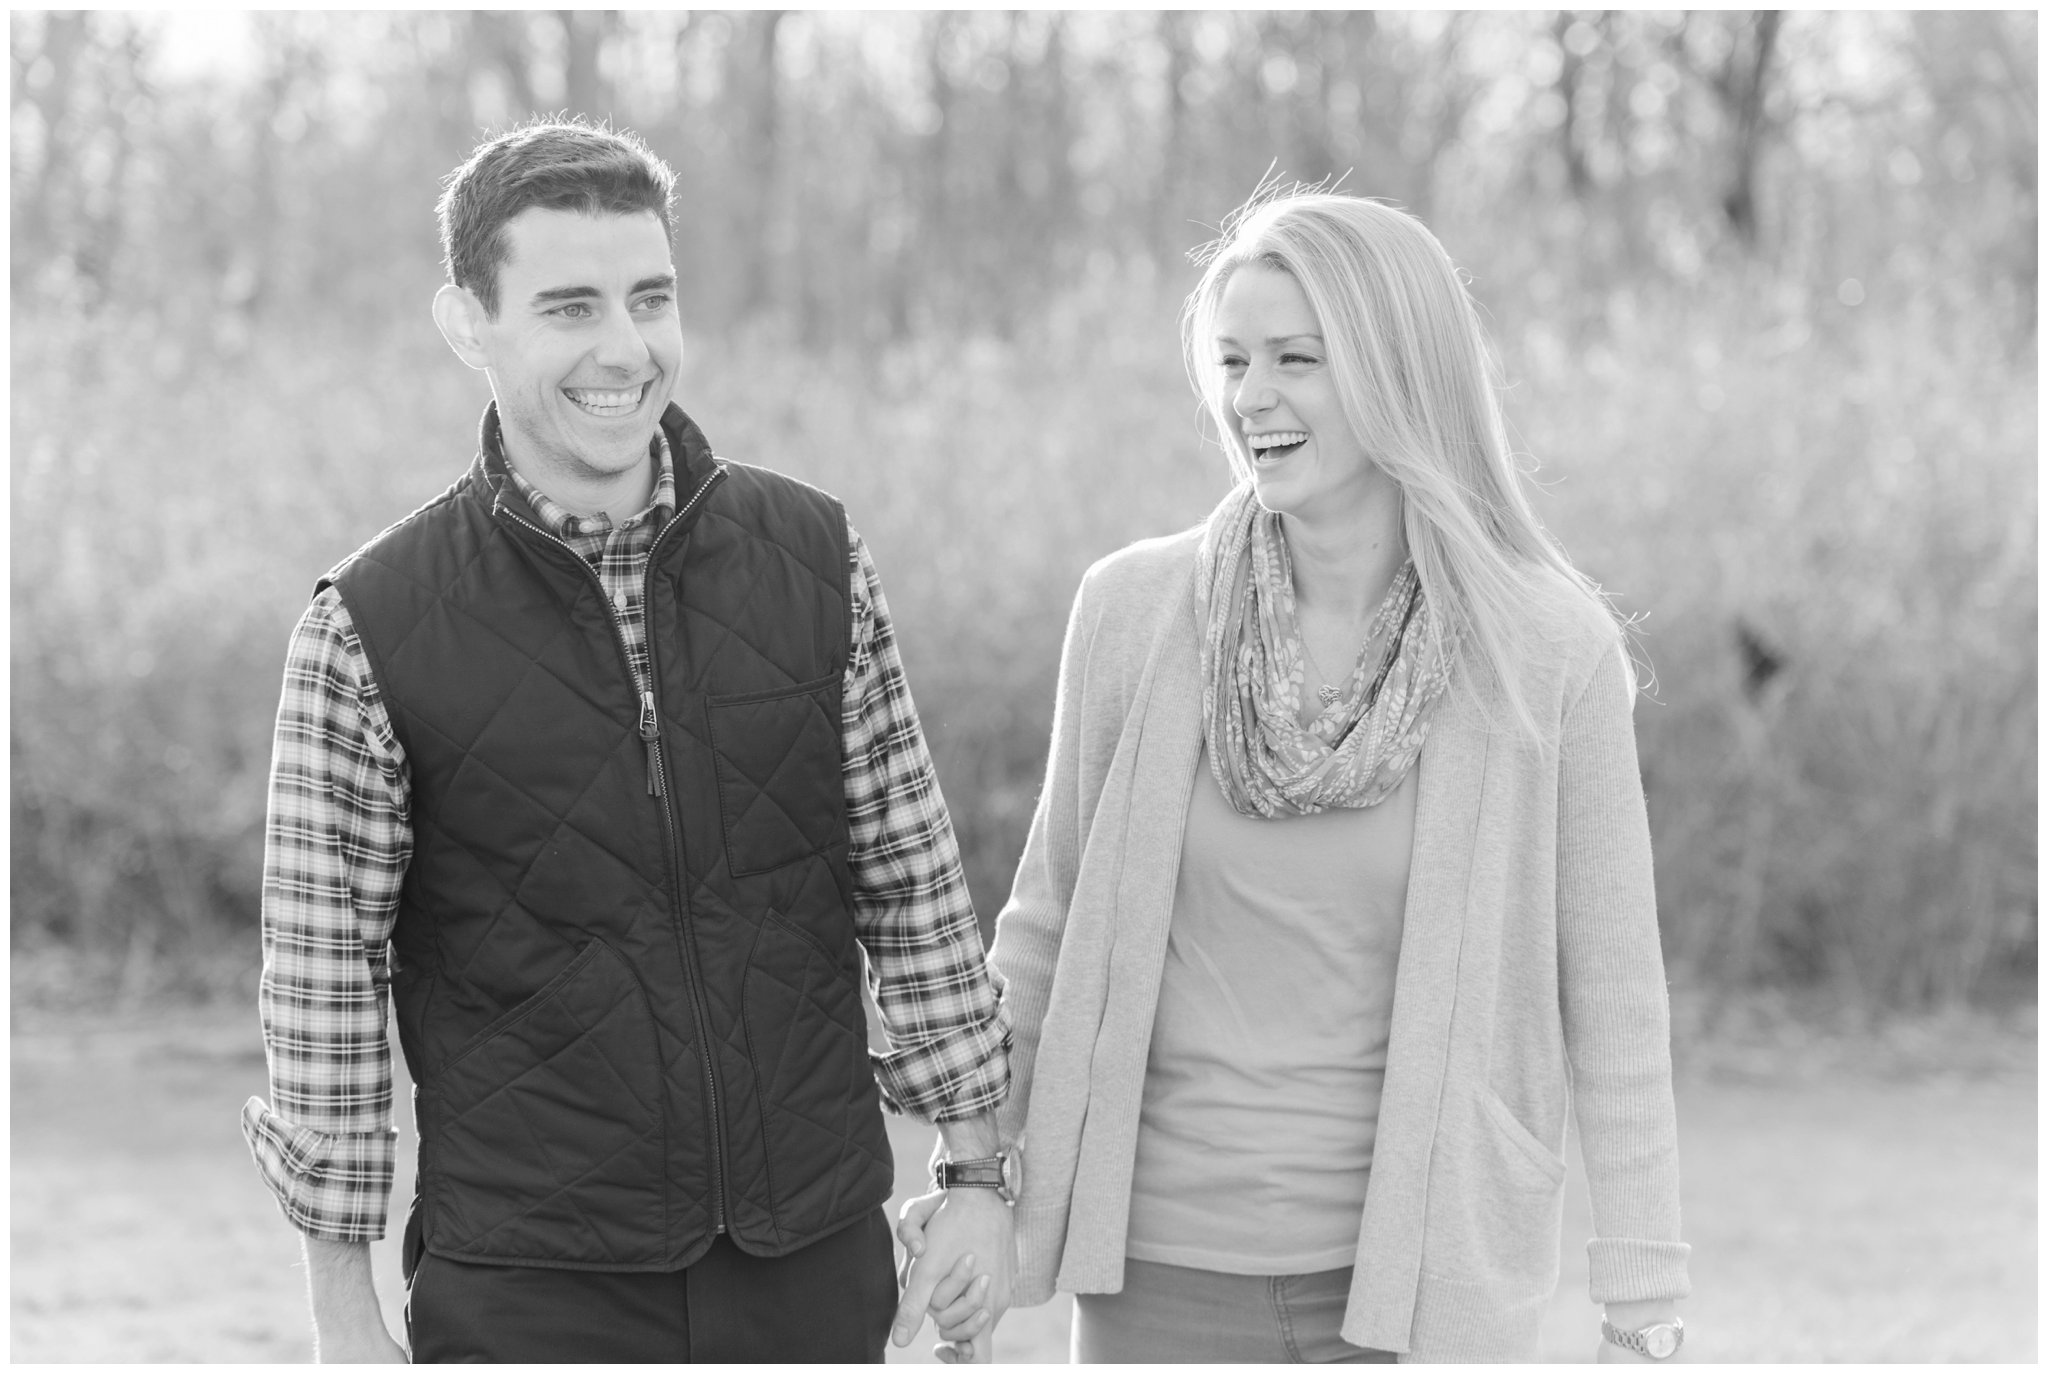 Upstate NY Engagement Session - Laura Lee Photography